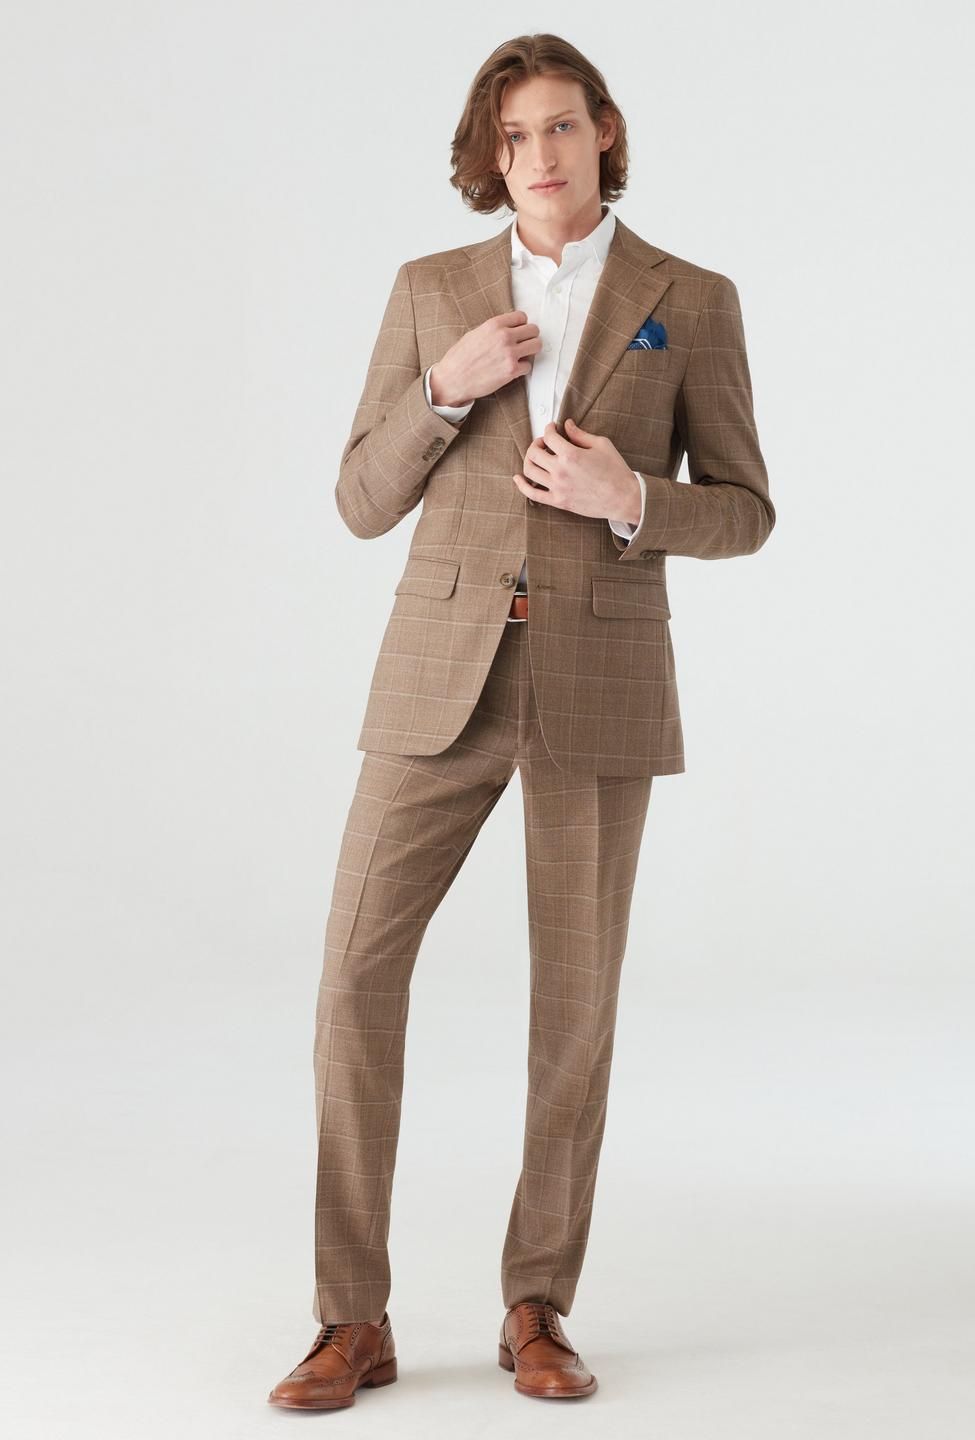 Kelbrook Check Light Brown Suit | Indochino